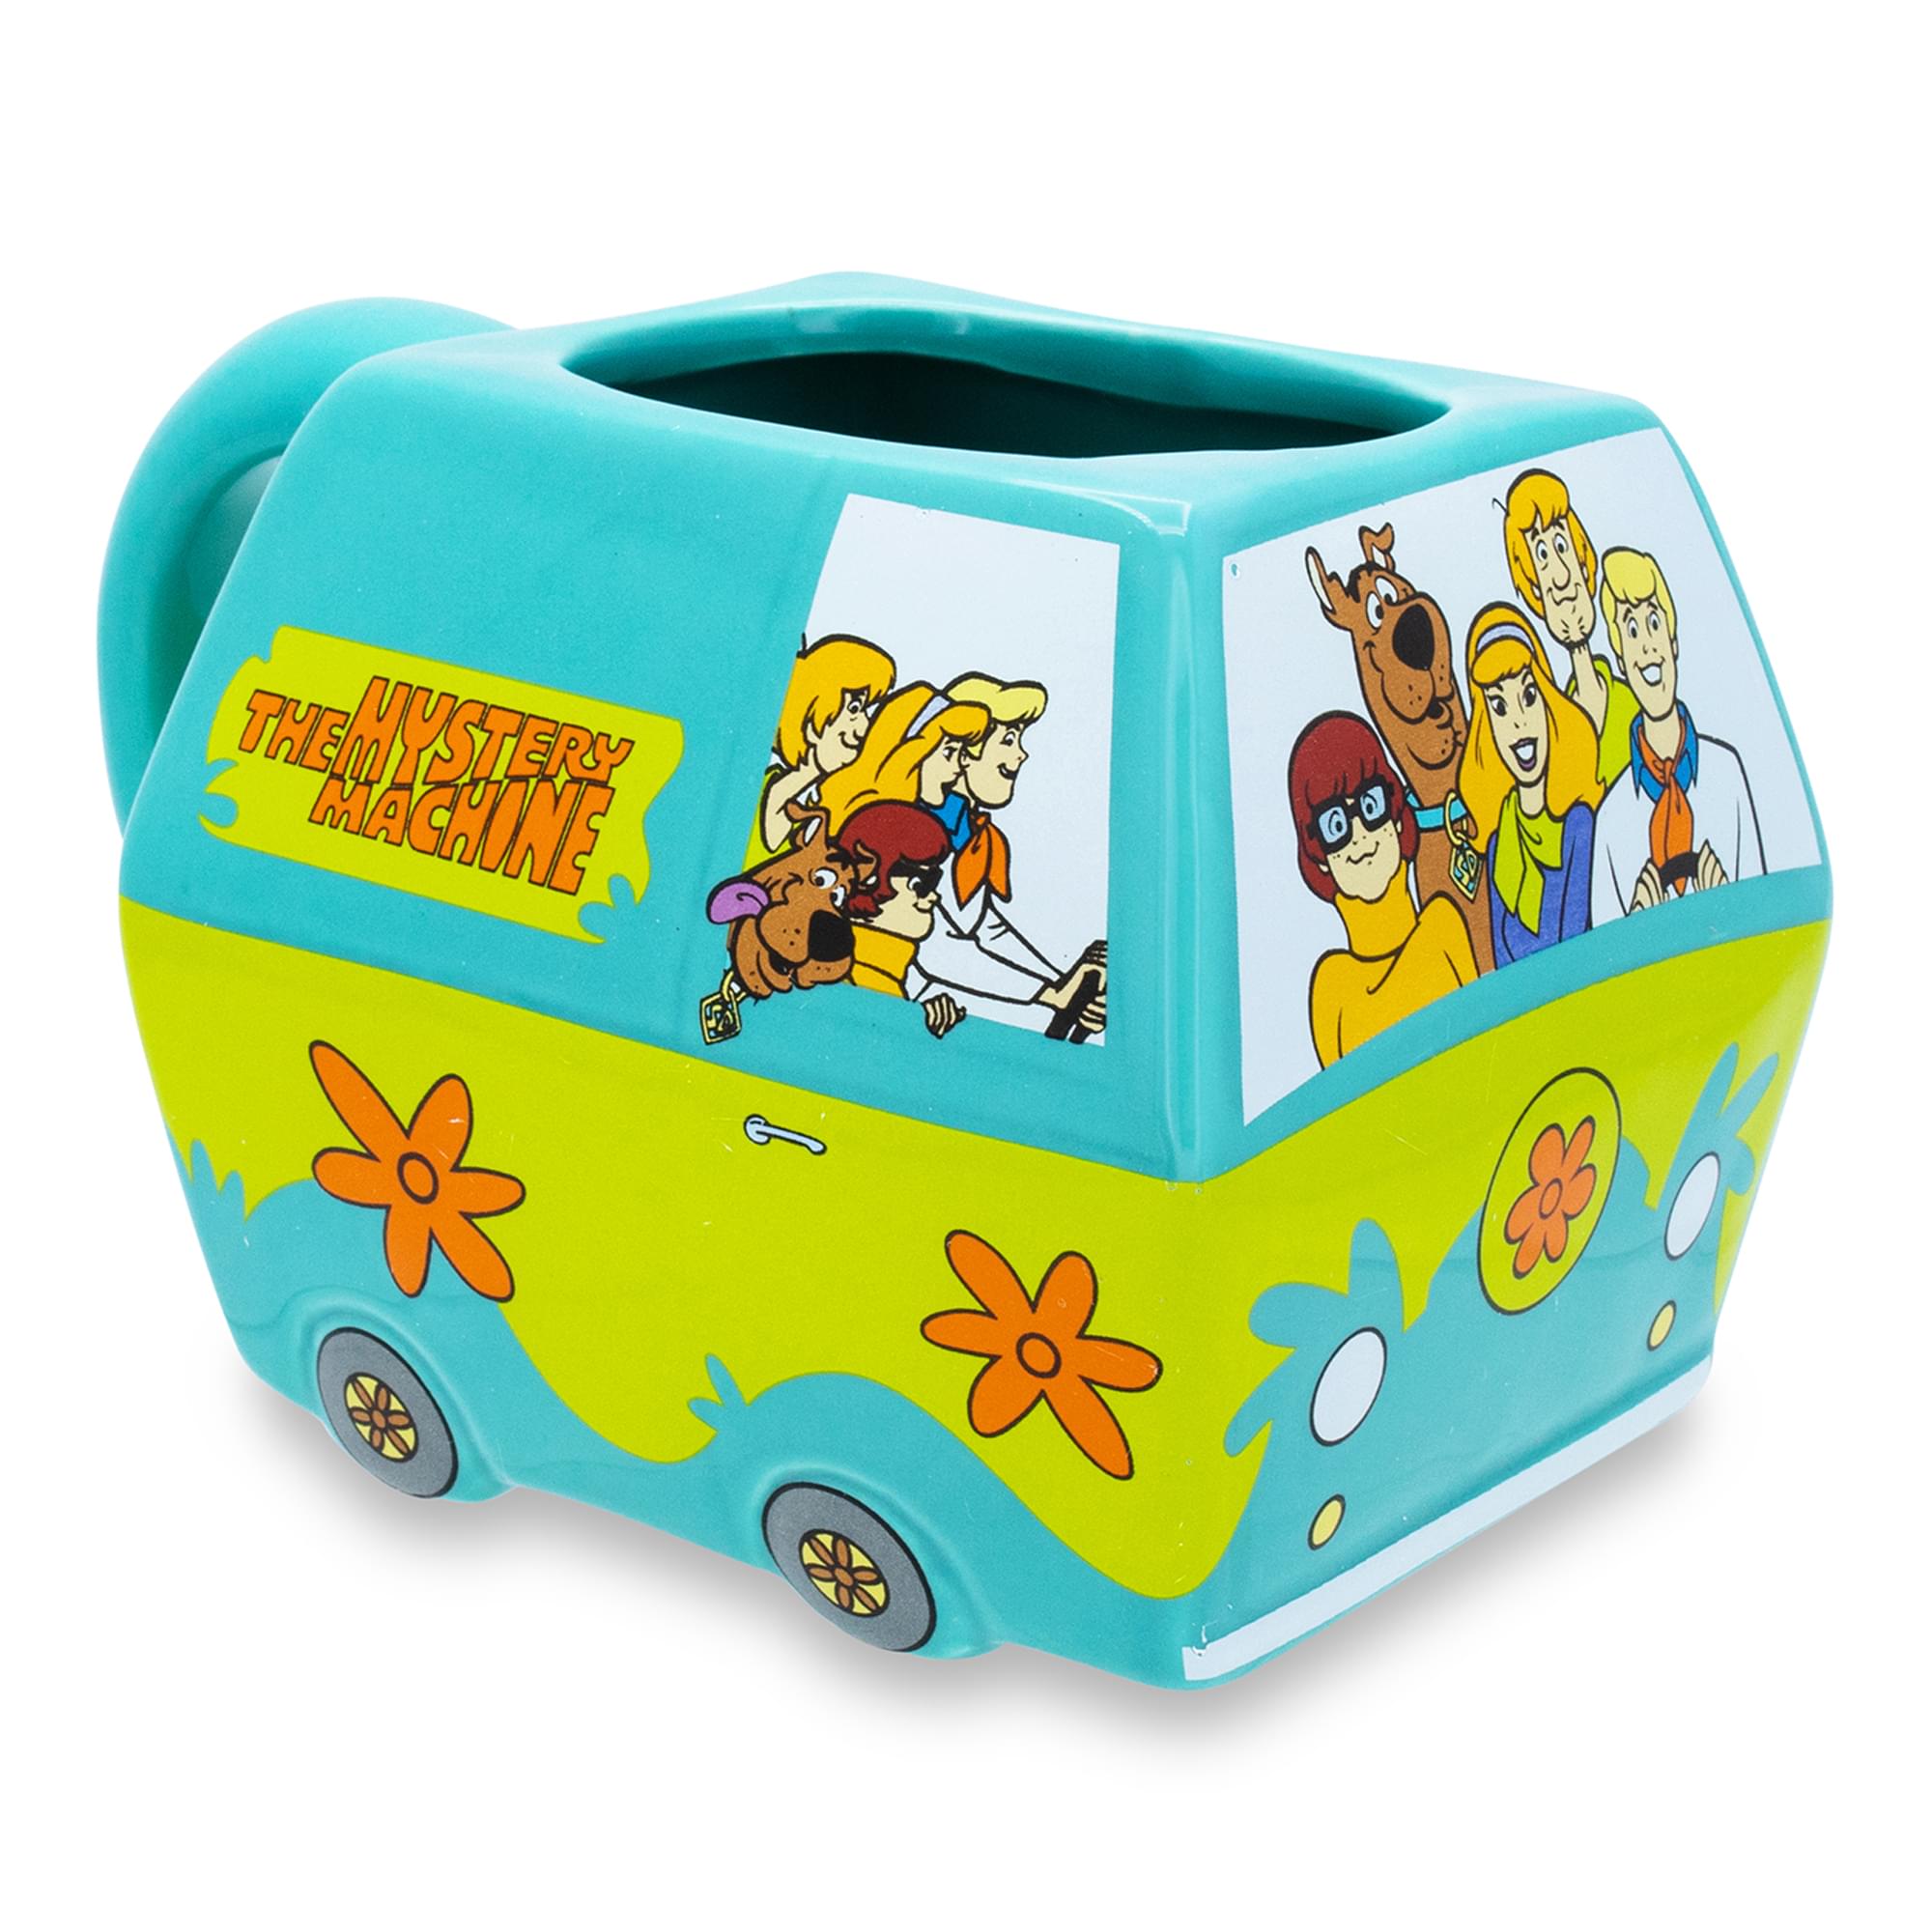 Scooby Doo Mystery Machine Lunch Box, Shaped Like the Van! NEW